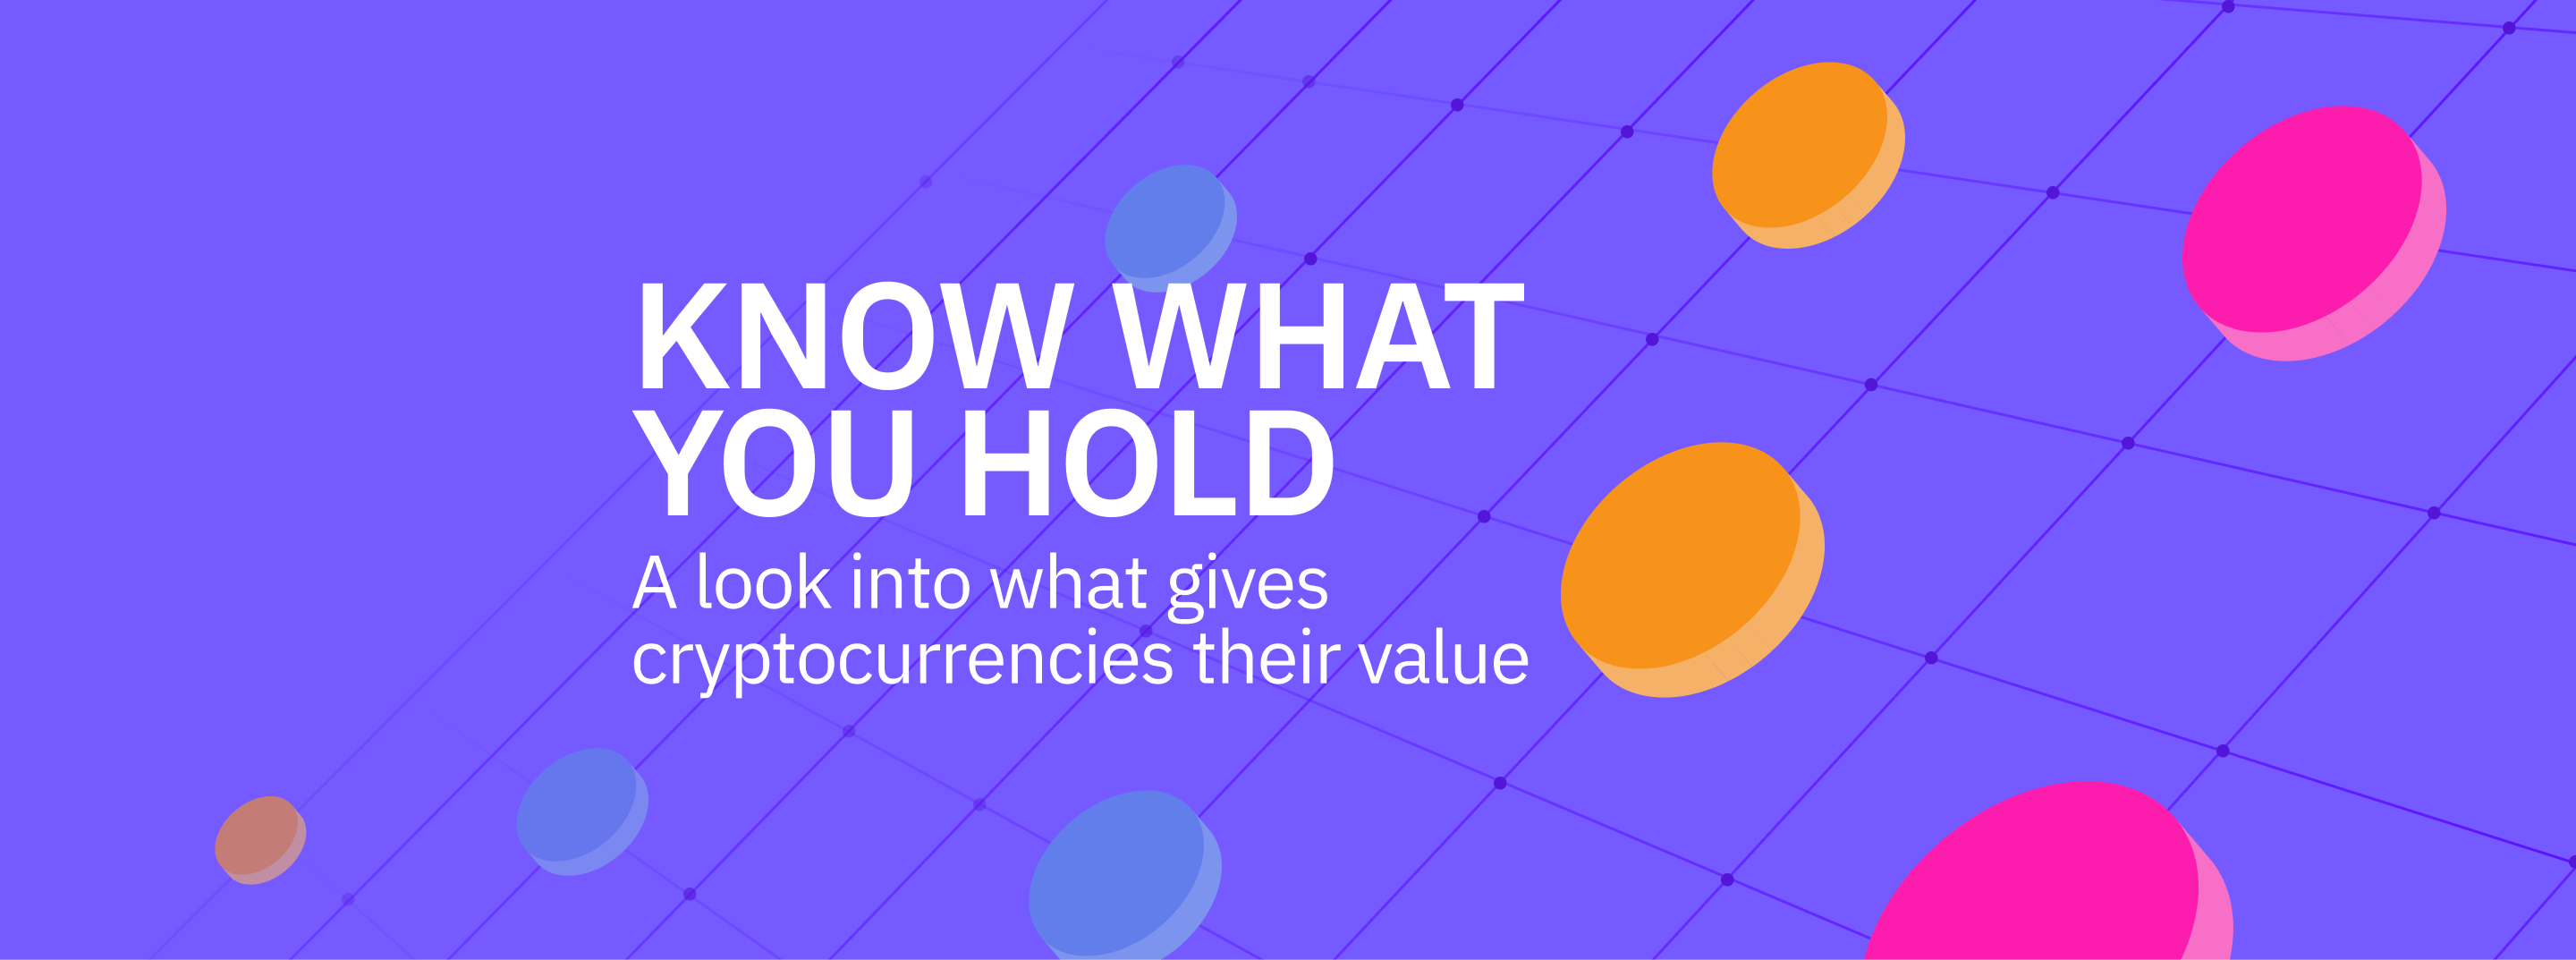 KNOW WHAT YOU HOLD: 
A Look Into What Gives Cryptocurrencies Their Value